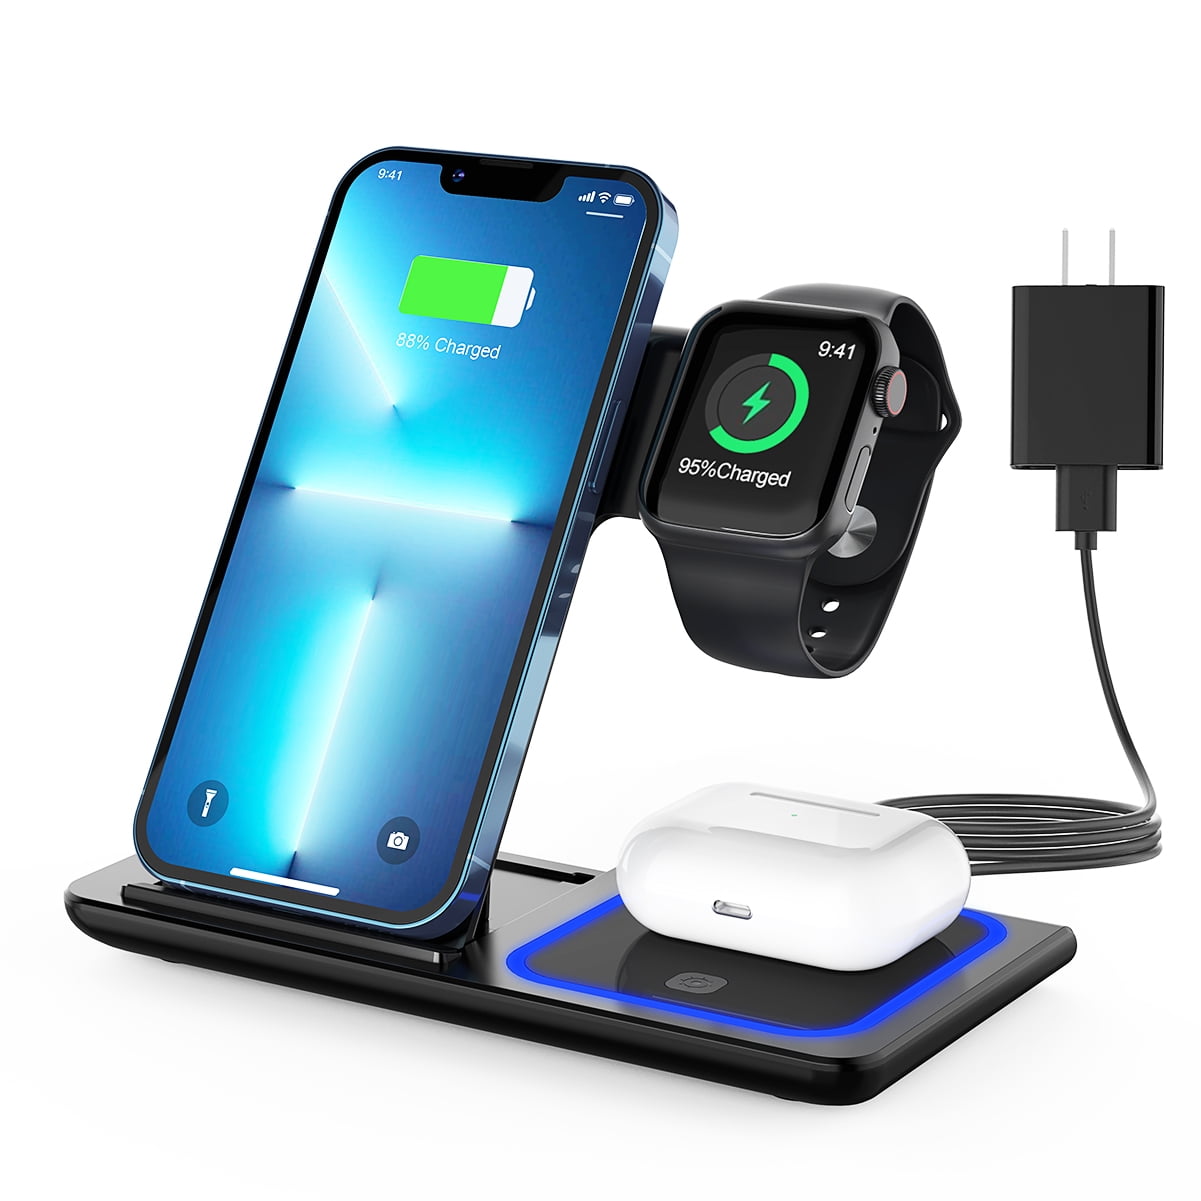 Charging Station for Multiple Devices Wood USB Docking Station for Apple Watch/iPhone/Airpods/Android 4 USB Port 1 Qi Wireless Charging Pad GPED 5 in1 Fast Charging Station Organizer 